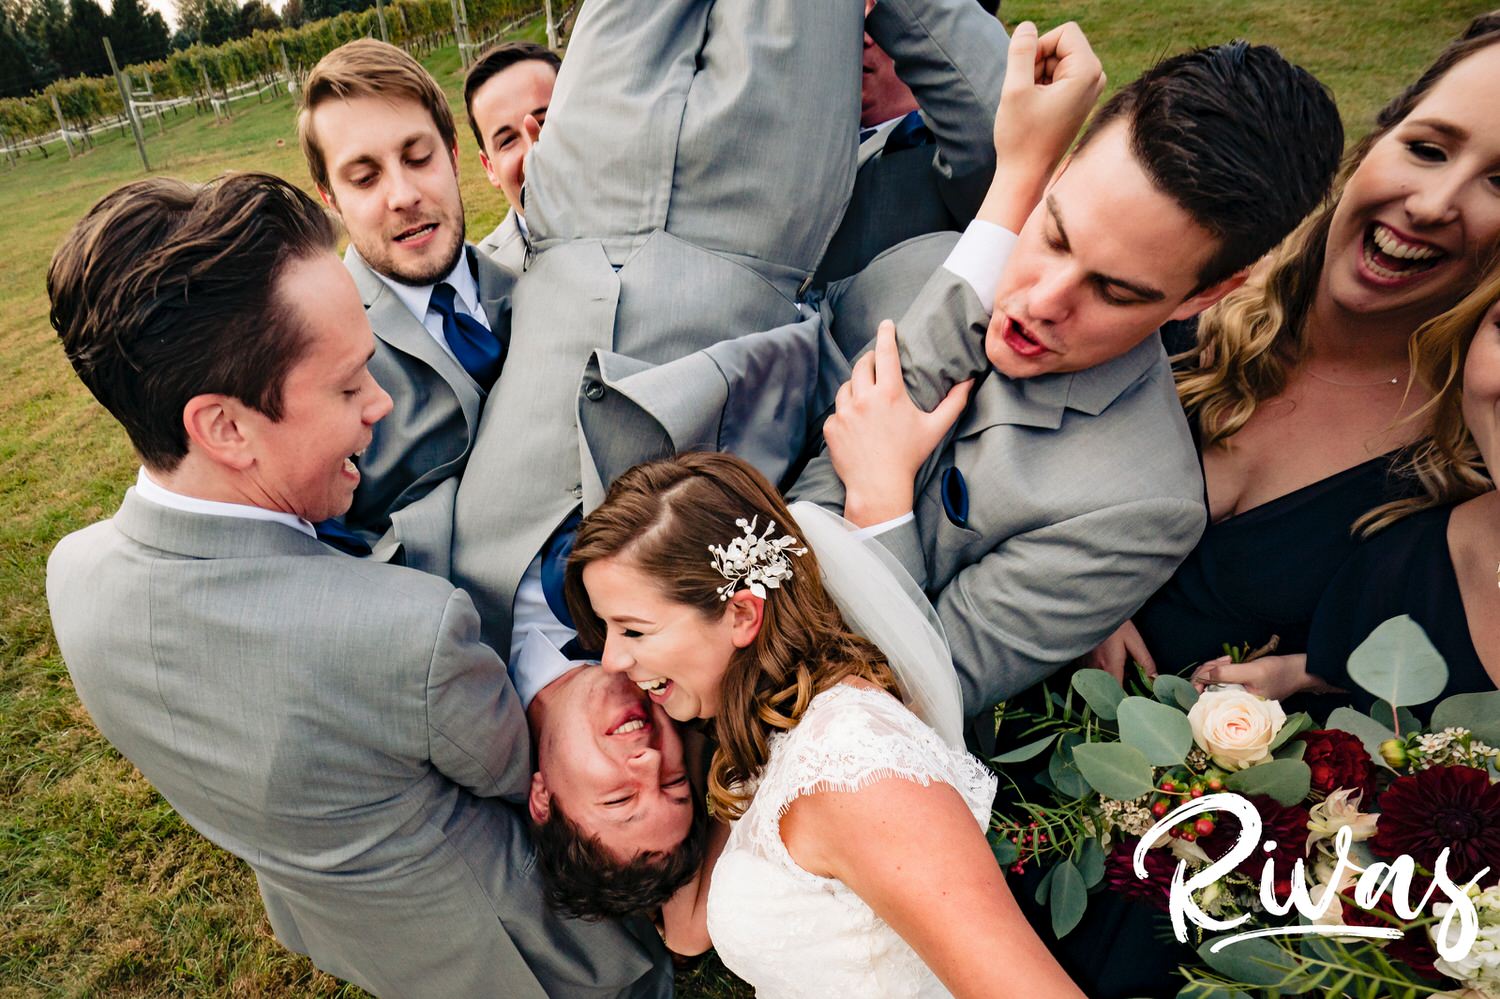 A candid, colorful picture taken from above an upside down groom of his bride and her bridesmaids looking at him laughing on the afternoon of their fall wedding day at The Barns at Hamilton Station Vineyard. 